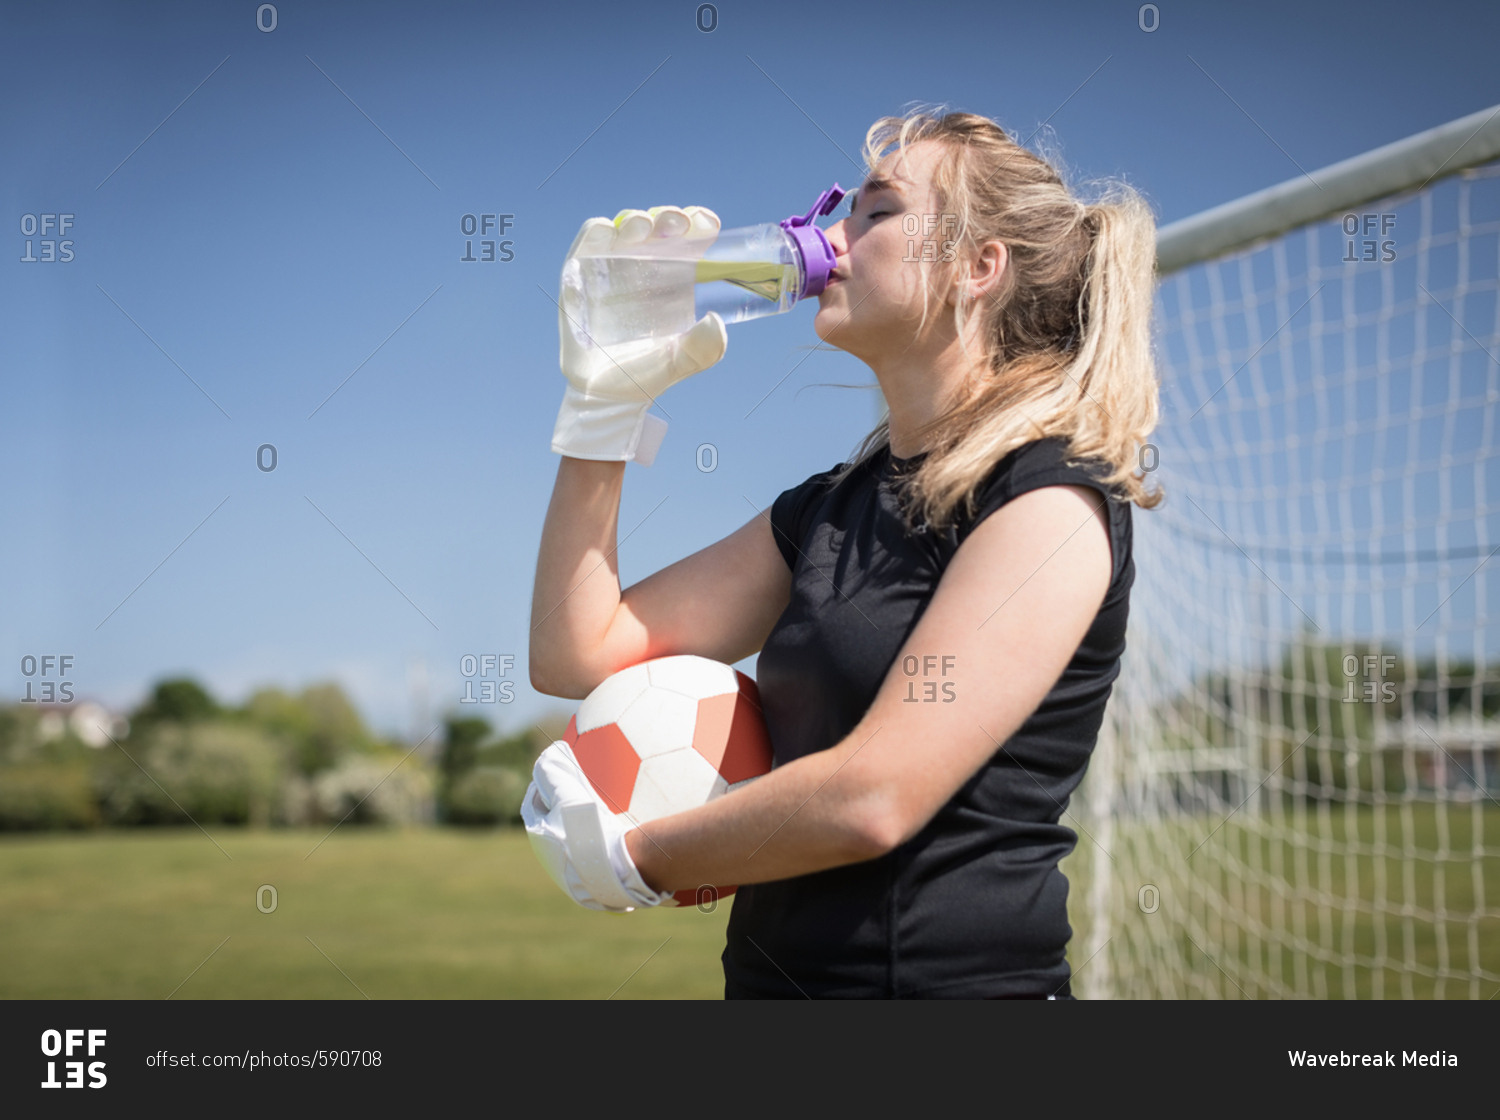 Thirsty female soccer player drinking water on field during sunny day